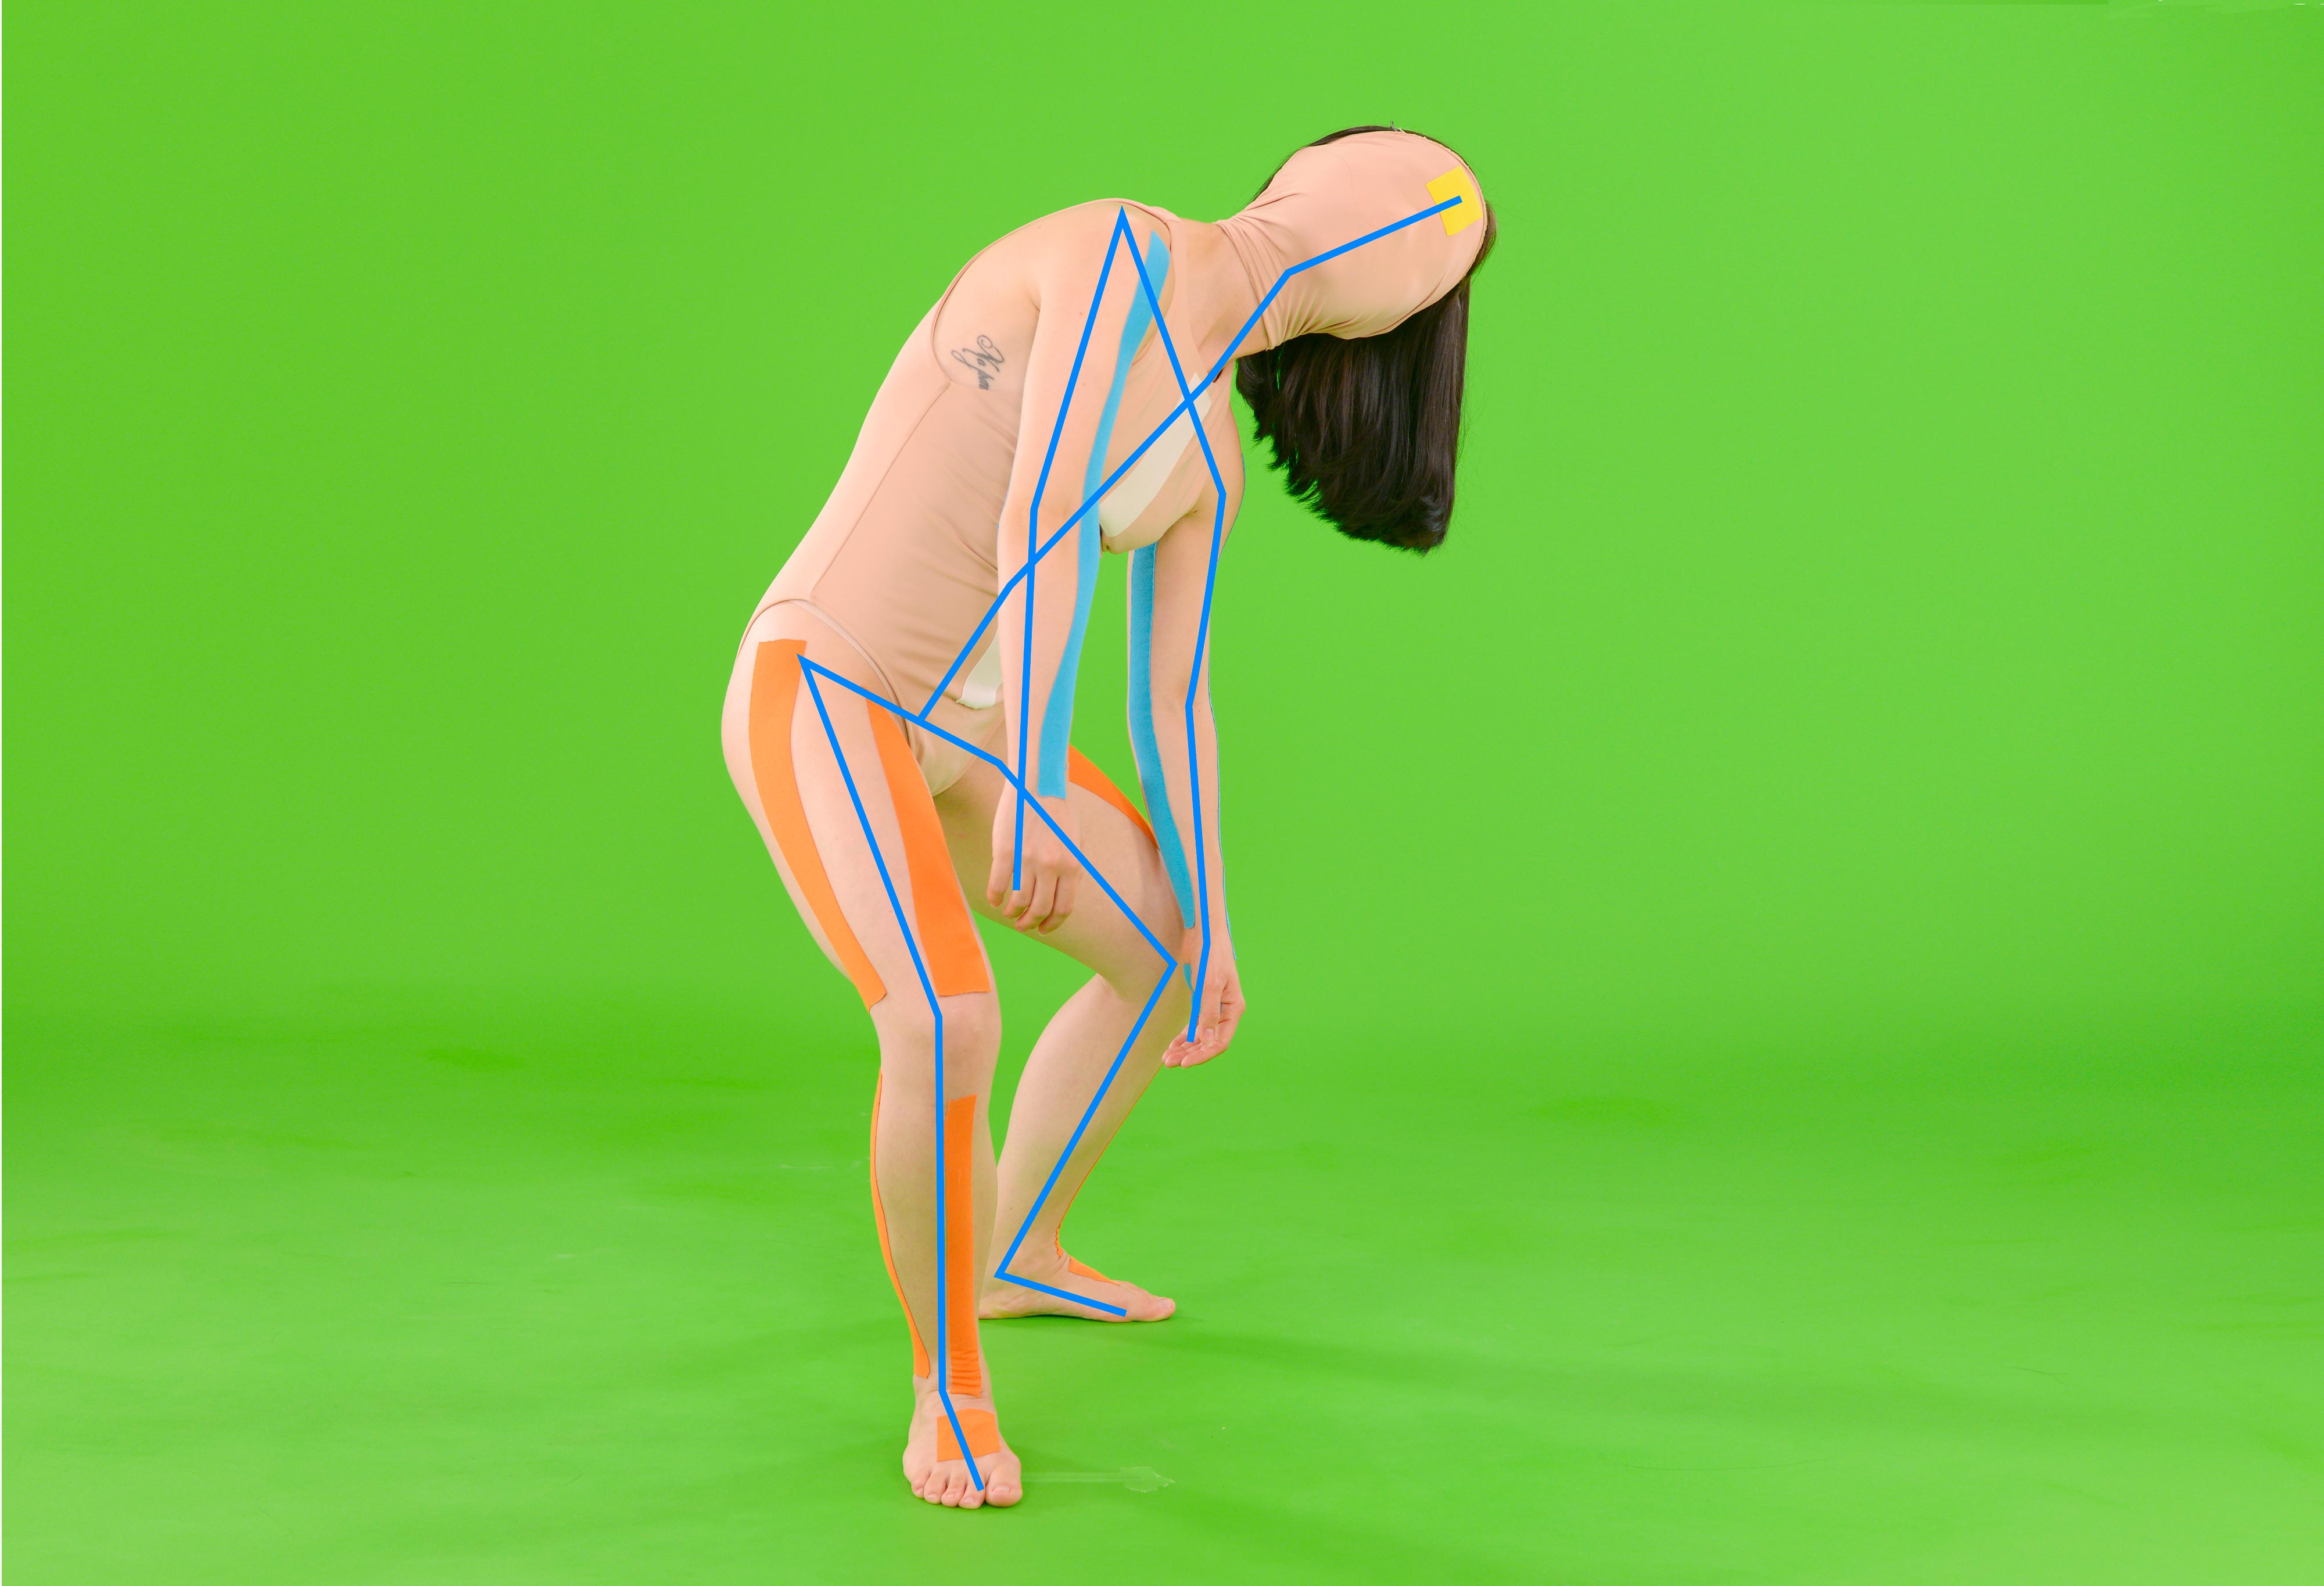 Half human, half machine, the figure of the video installation Infinite Posture Dataset is stuck within the confinements of the screen and either following or giving certain instructions to the rhythm of the machine. She is wearing a tight suit reminiscent of the ones used for motion capture techniques, involving the digital registration of body movement. In the work the performer is talking about the feelings stirred in her body memory while performing the movements and which results in spoken out loud, incoherent emotions. Her limbs also seem to have been detached. All in all, the spectator is left with random pieces of the puzzle. In similar cases we would usually focus on the face, but that too is hidden. While observing the deconstructed and reformulated poses of the performer, could the machine perhaps understand what she is trying to communicate? Vogelaar reveals how the bigger picture continues to be intangible to both human and machine. Neither human, nor machine has all the answers.